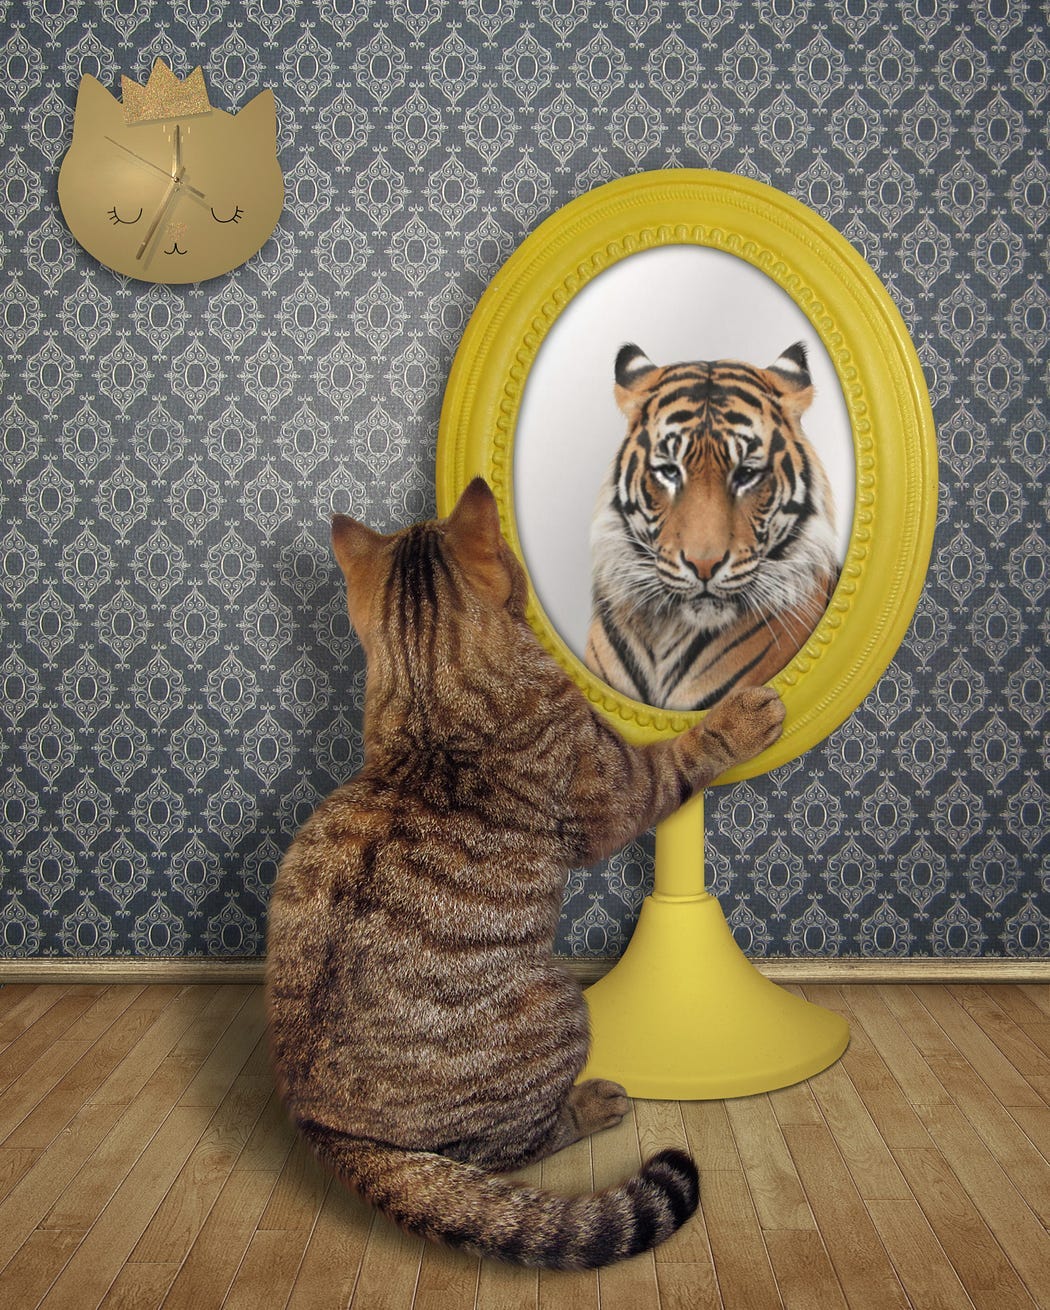 Cat looking into a mirror, seeing a tiger back in the reflection